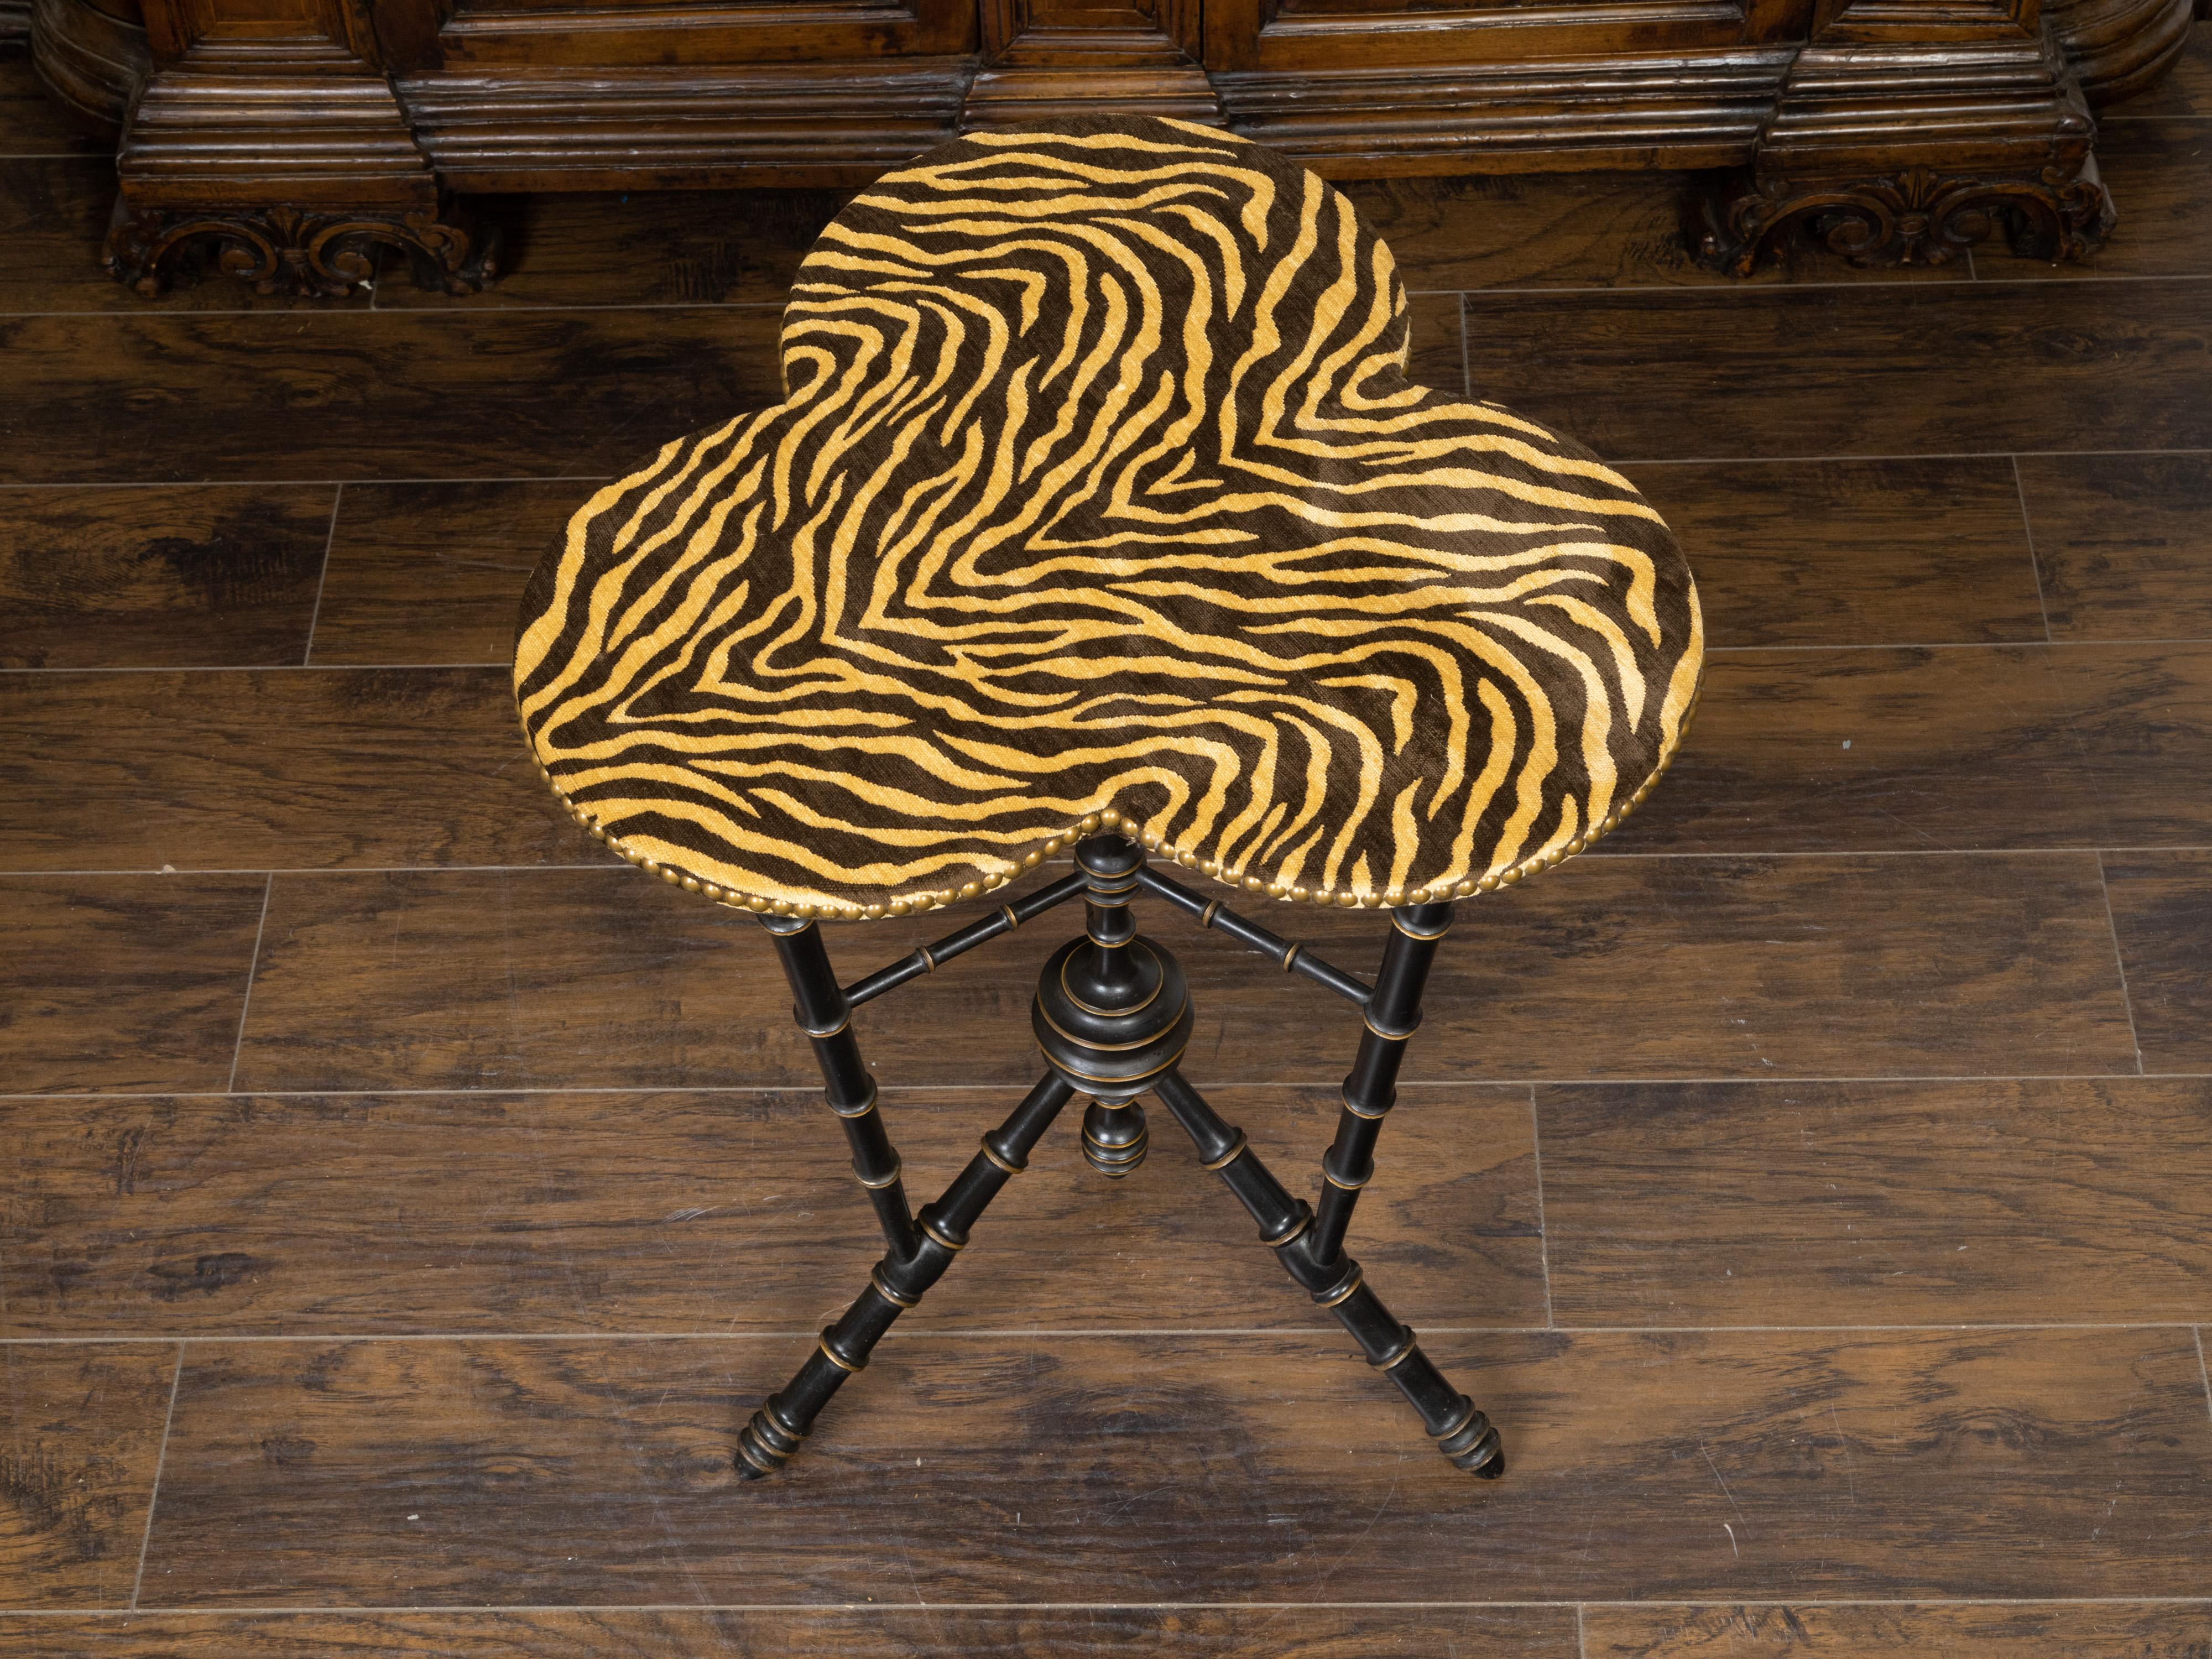 An English faux bamboo ebonized side table from the late 19th century, with clover leaf top and tiger upholstery. Created in England during the last quarter of the 19th century, this side table features a clover leaf top with faux tiger upholstery